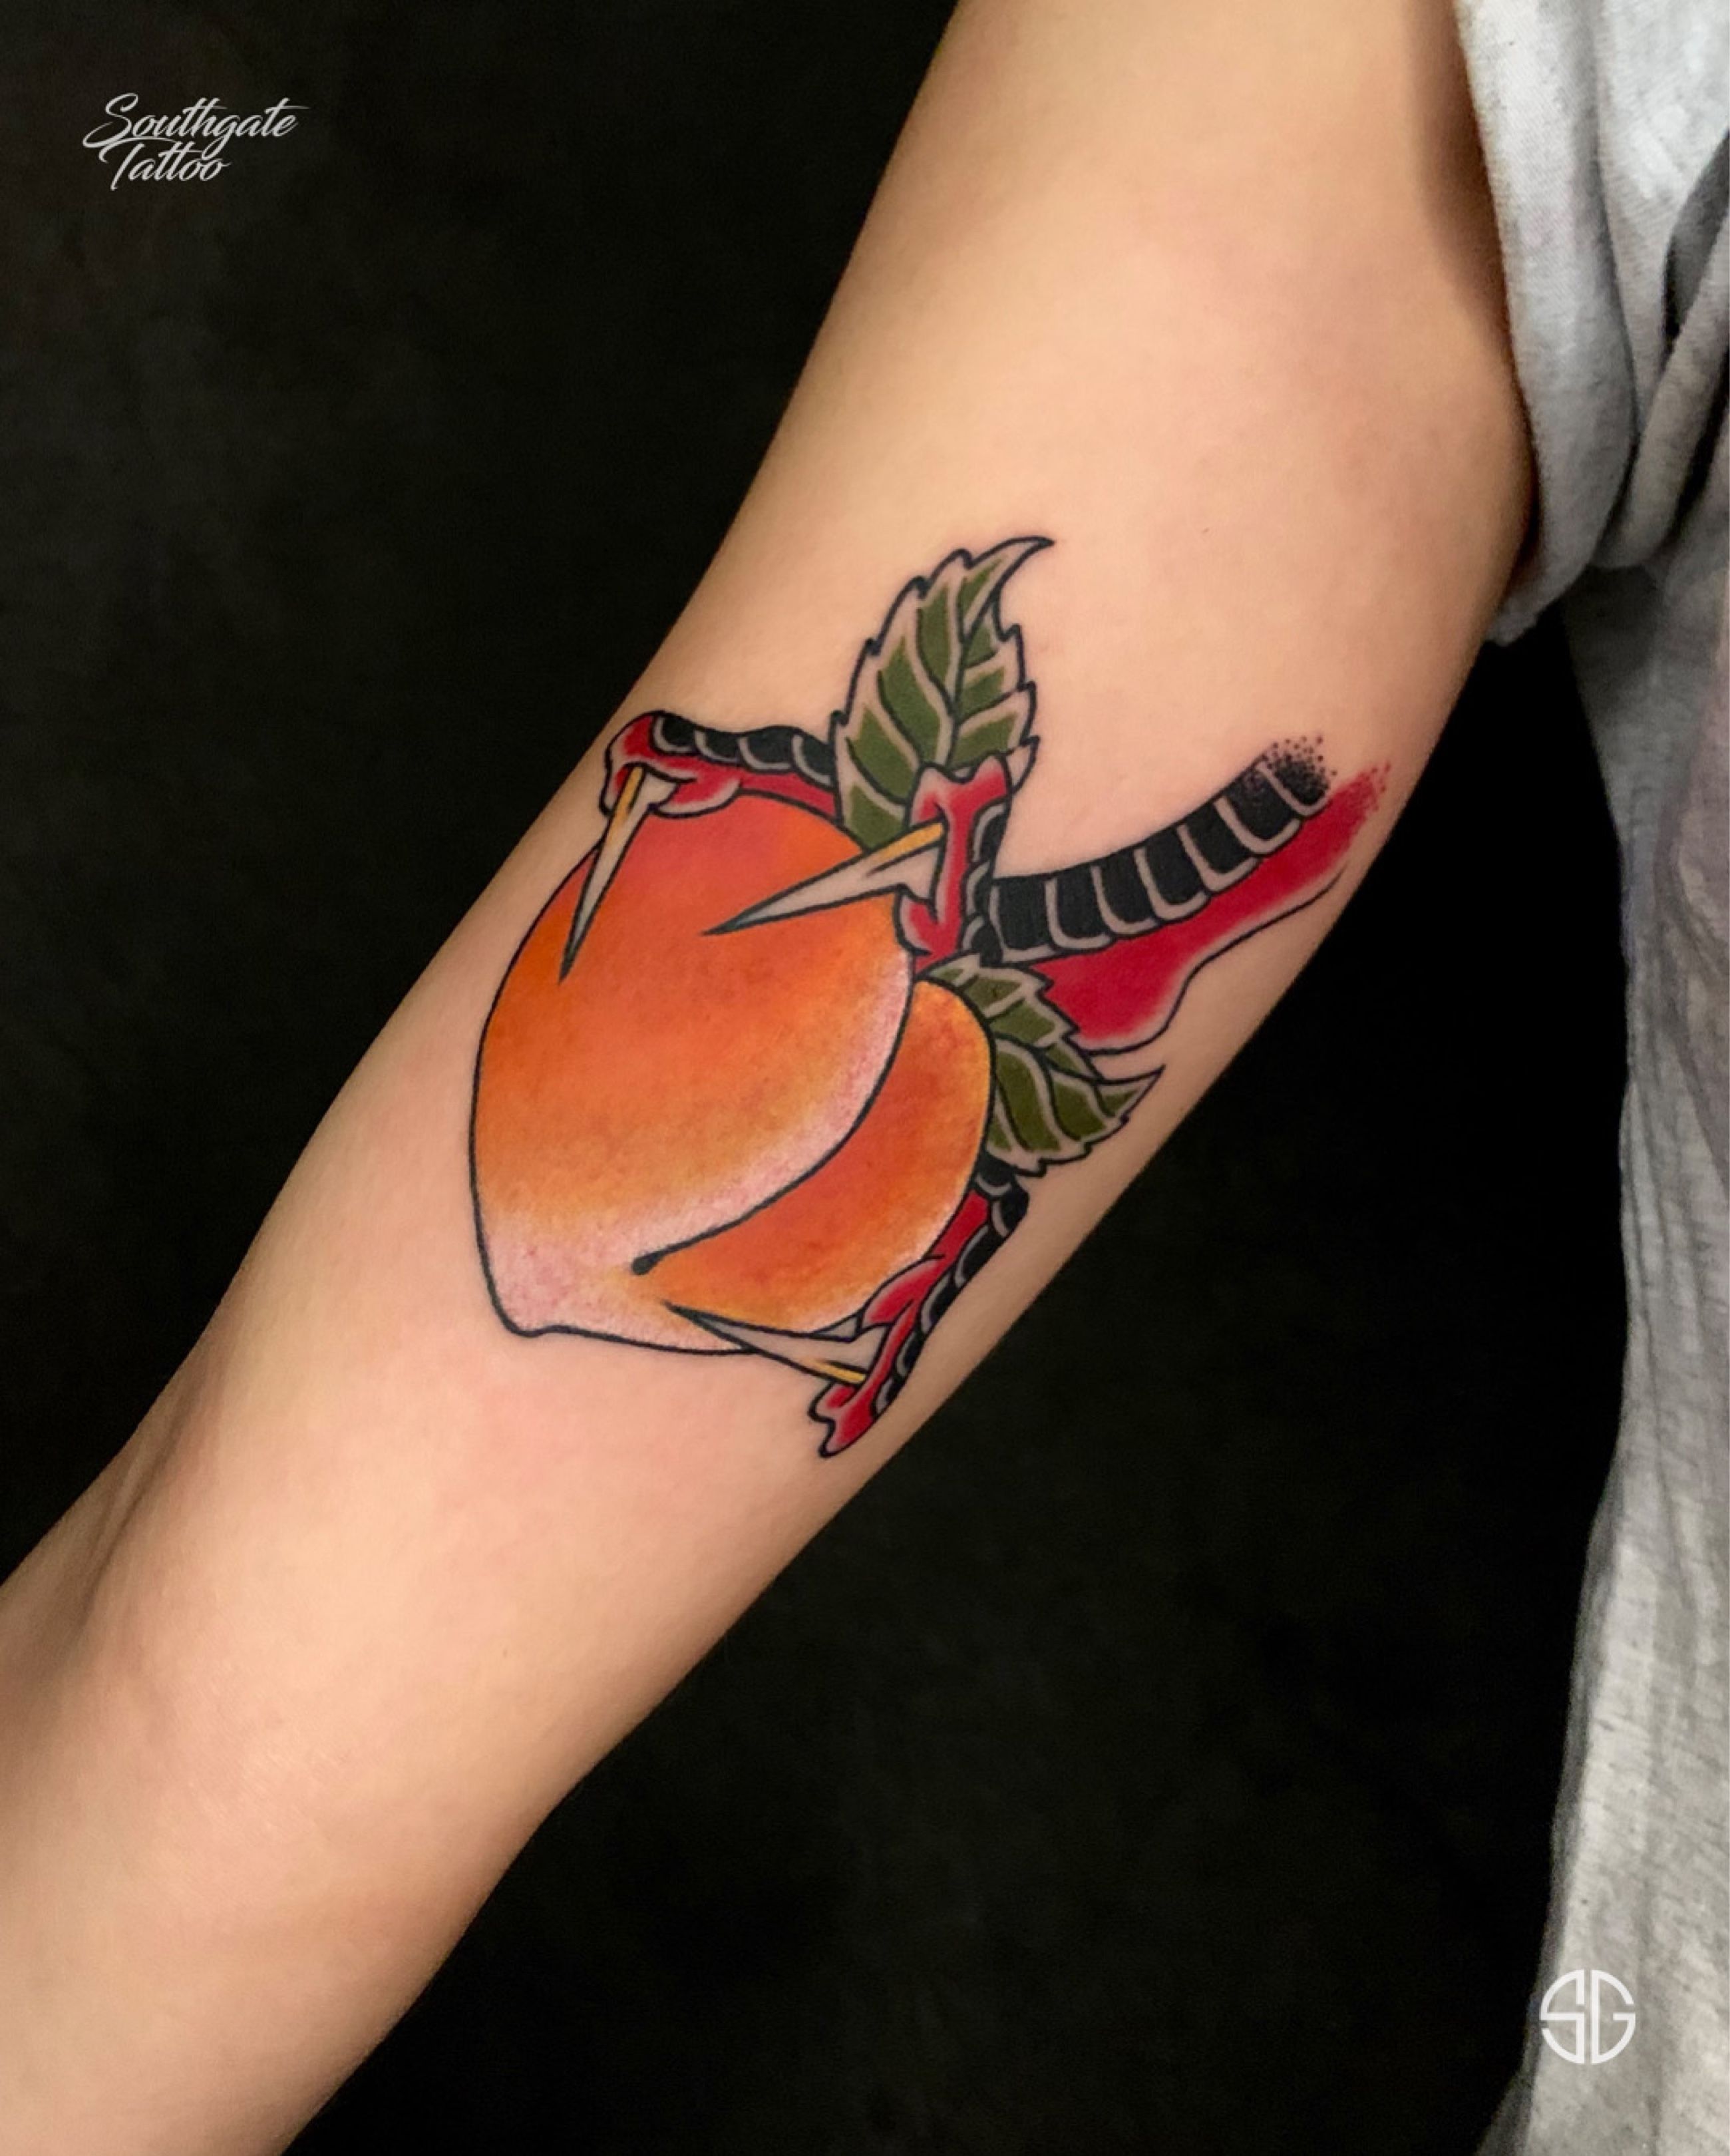 26 Delicate And Sweet Peach Tattoo Designs Ideas To Inspire Your Next Ink   Psycho Tats